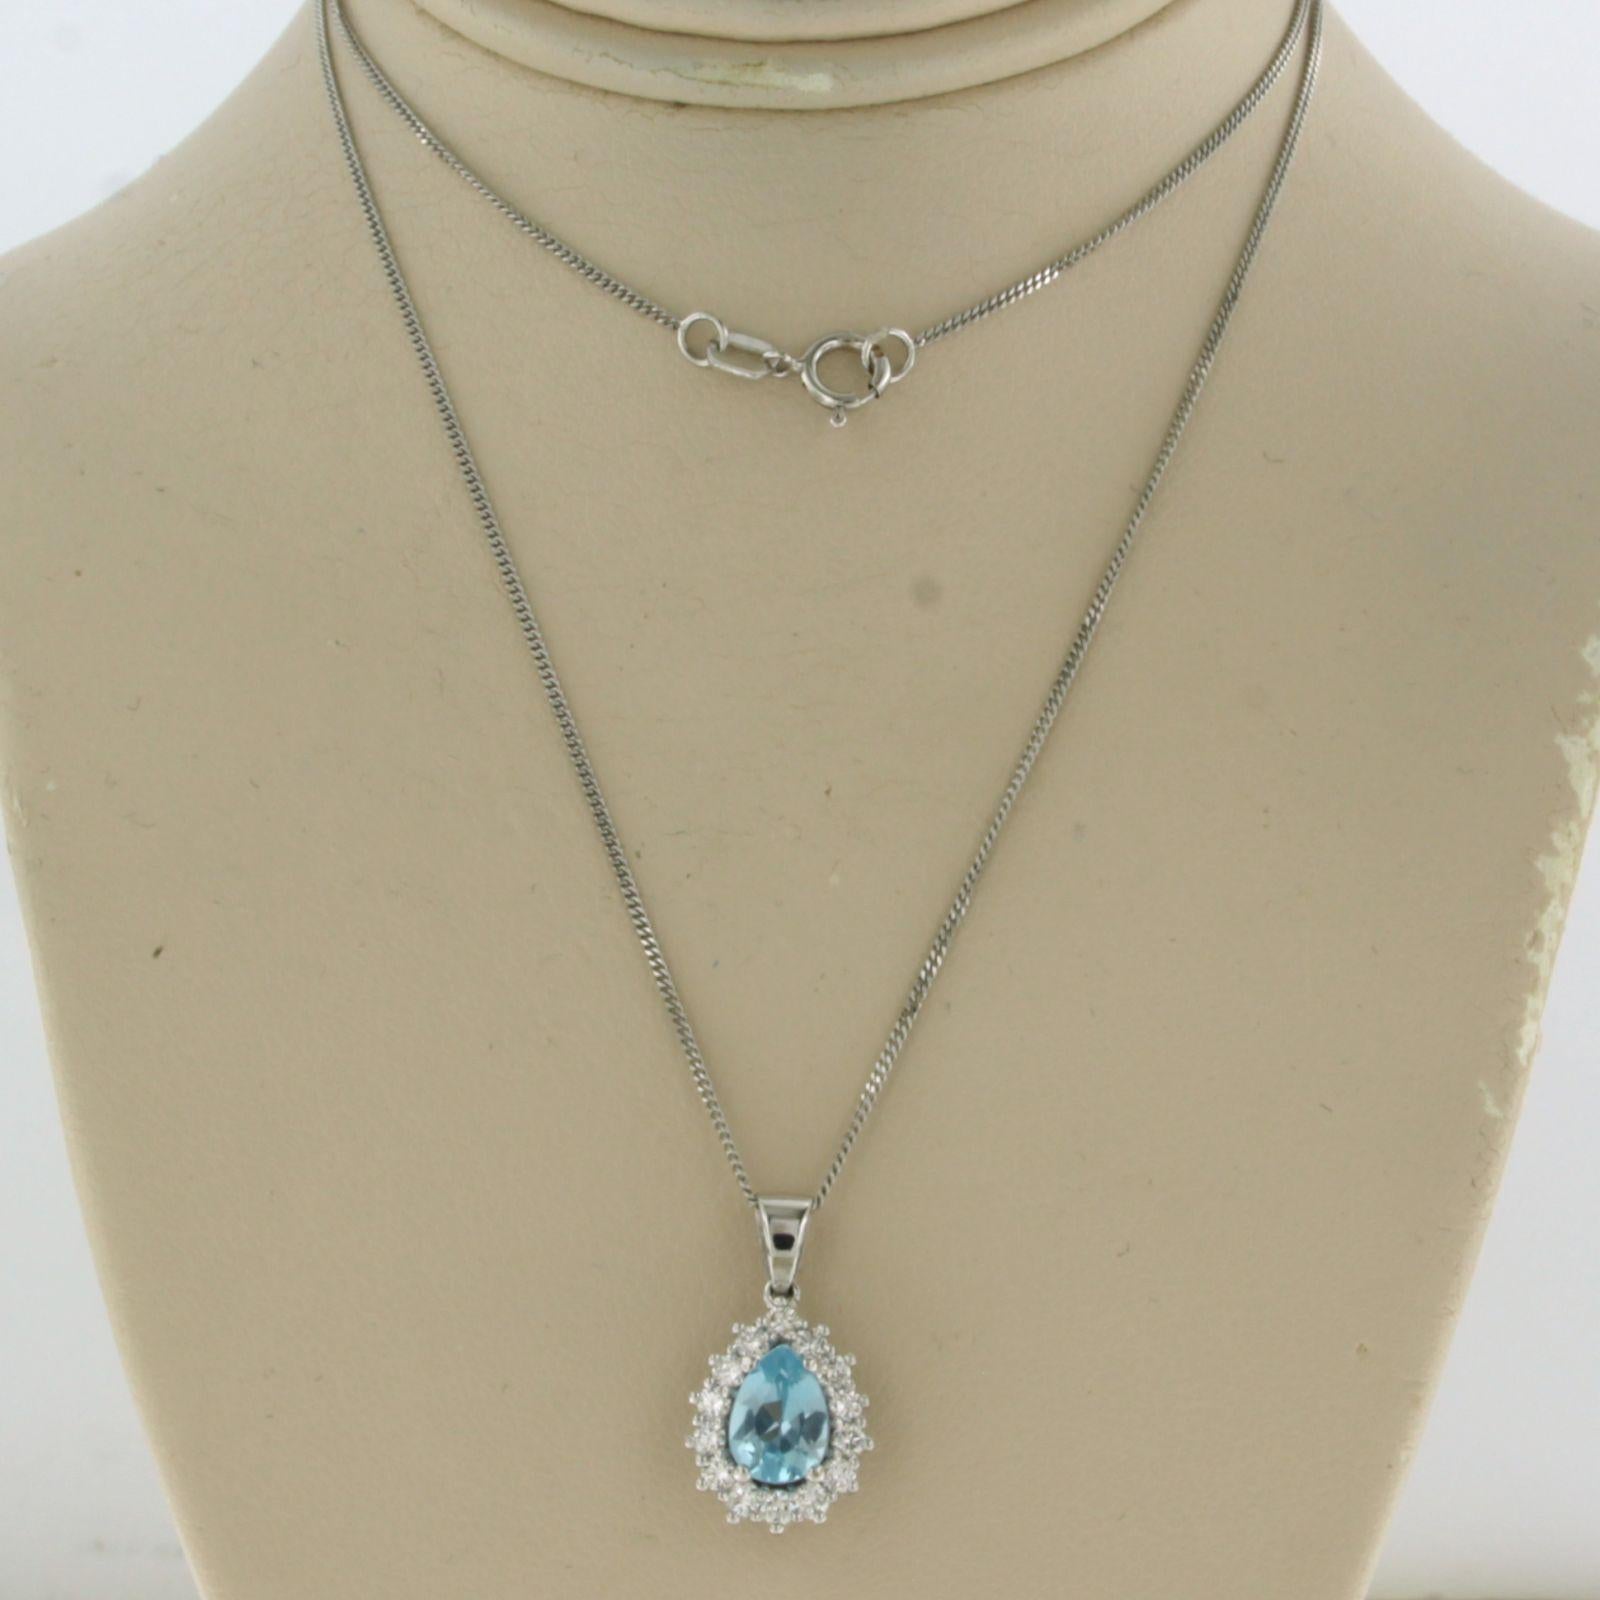 Modern Necklace and pendant set with topaz and diamonds 14k white gold